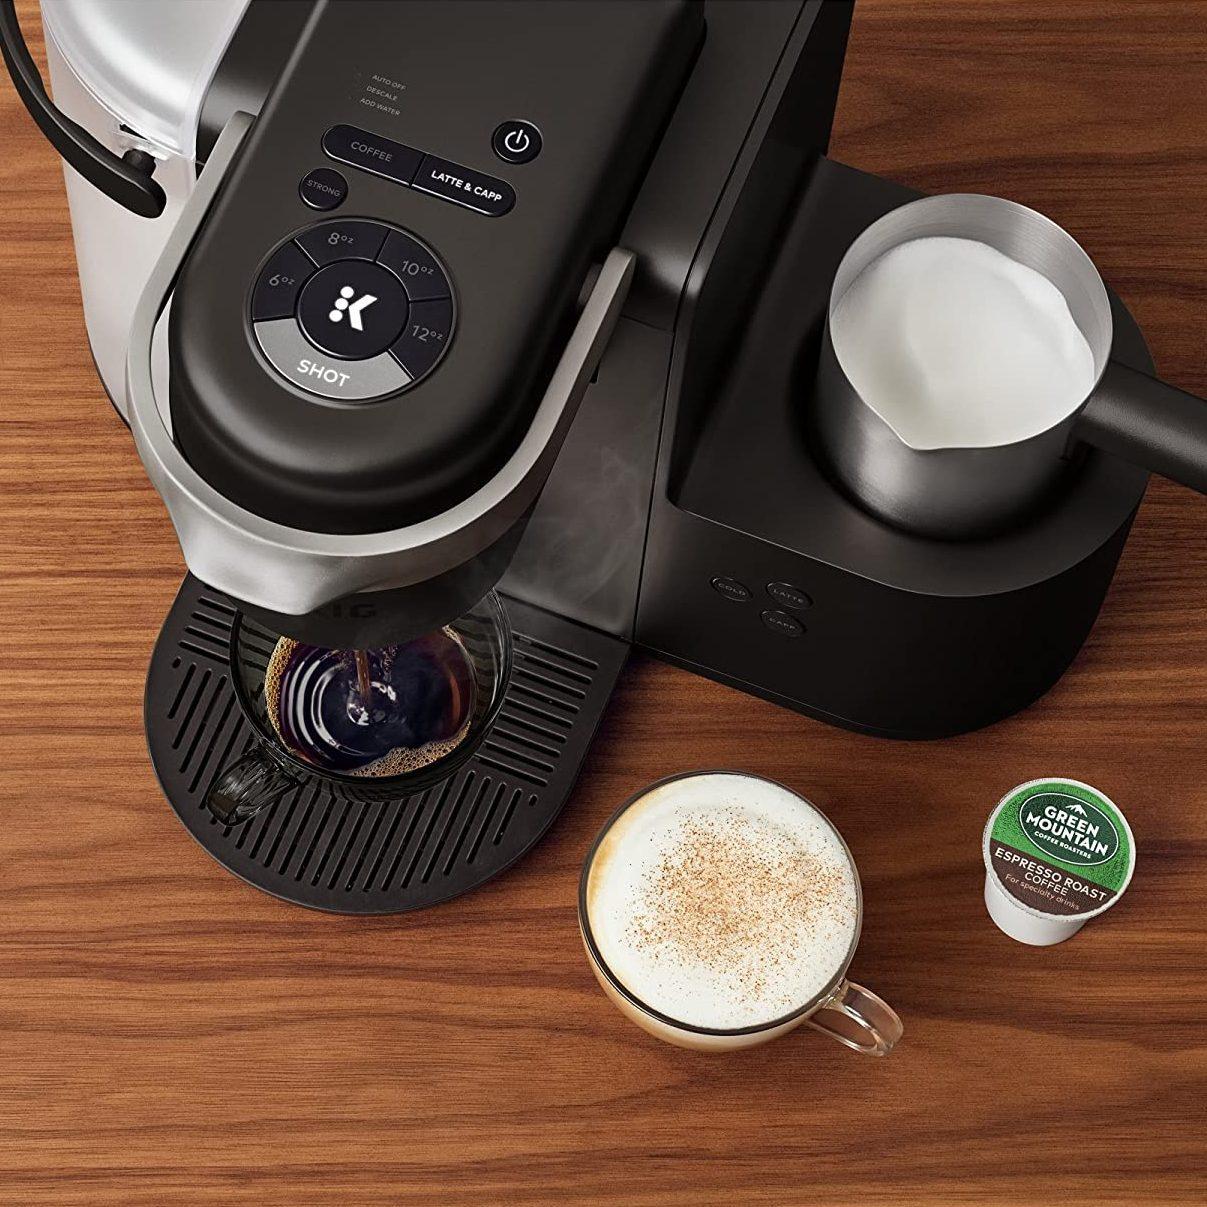 Best single-serve coffee makers 2023, tried and tested